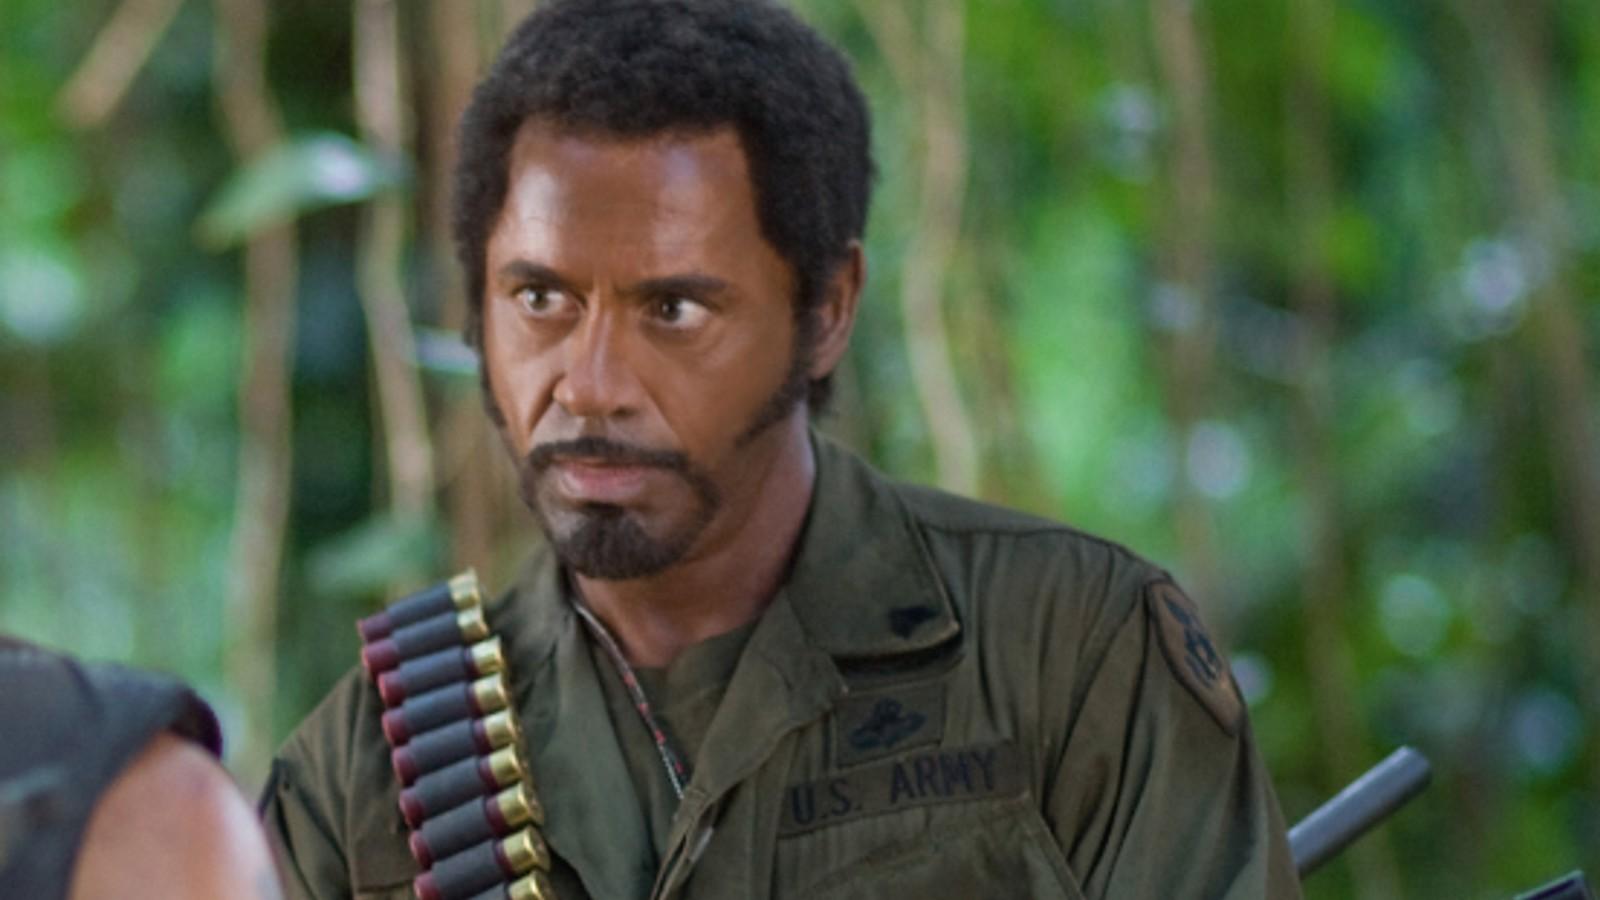 Robert Downey Jr. defends controversial Tropic Thunder role as fighting